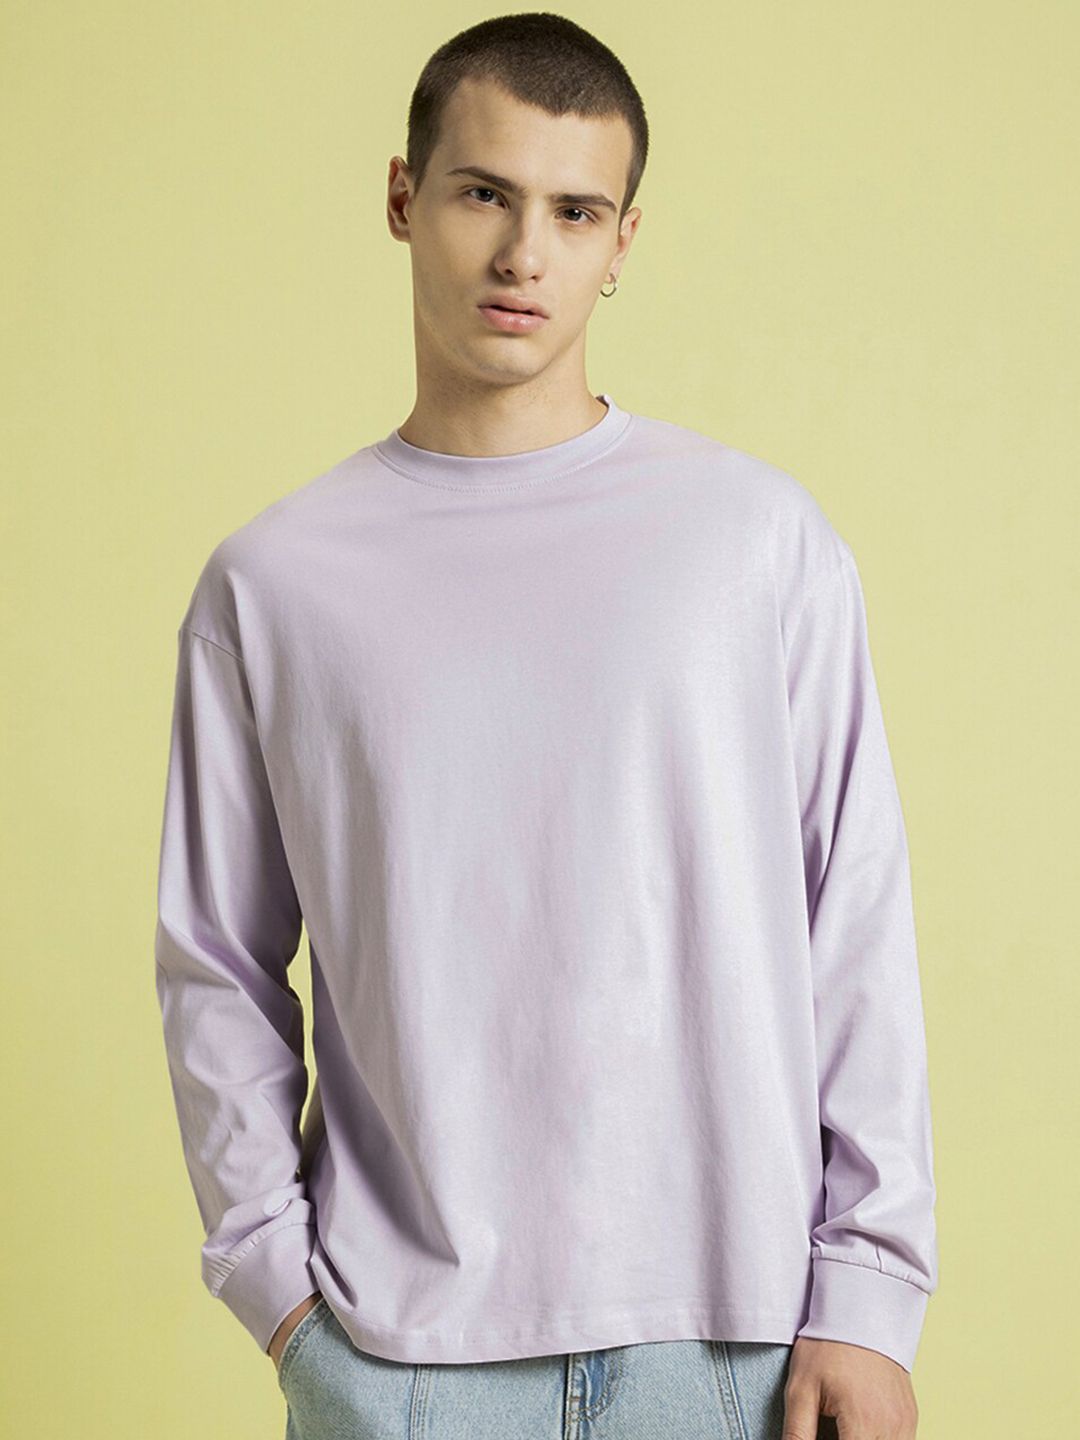 Buy Fitkin Men Nude Pink Raw Edge Neck Style Long Sleeves T-shirt online